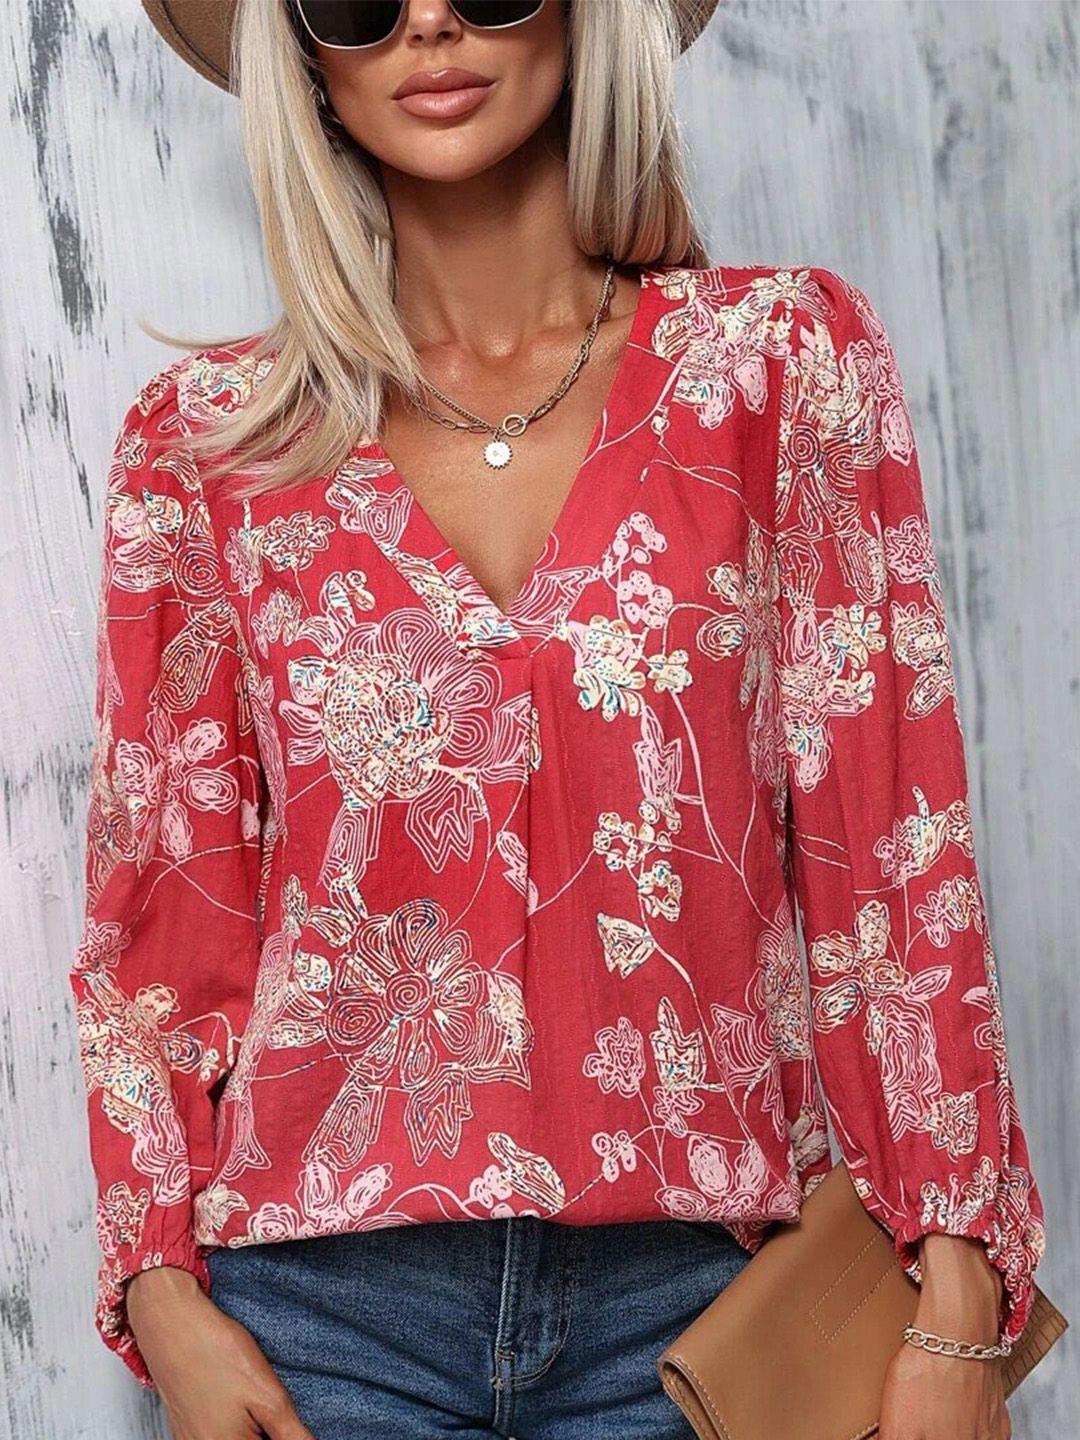 slyck red tropical top